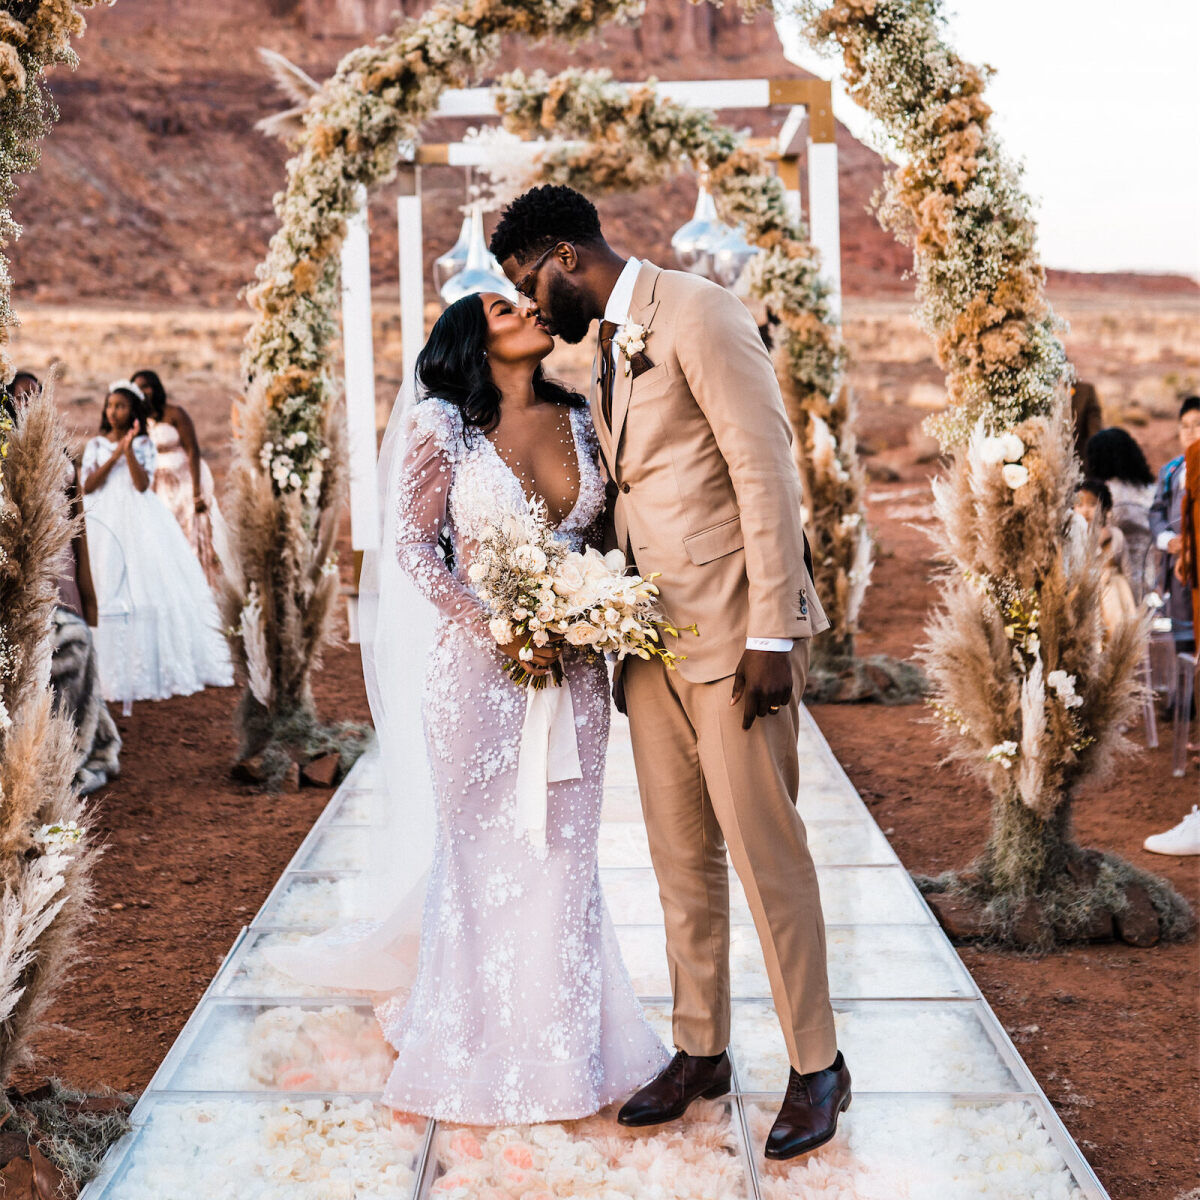 Newlyweds share a kiss at the top of their ceremony aisle during their modern desert wedding.